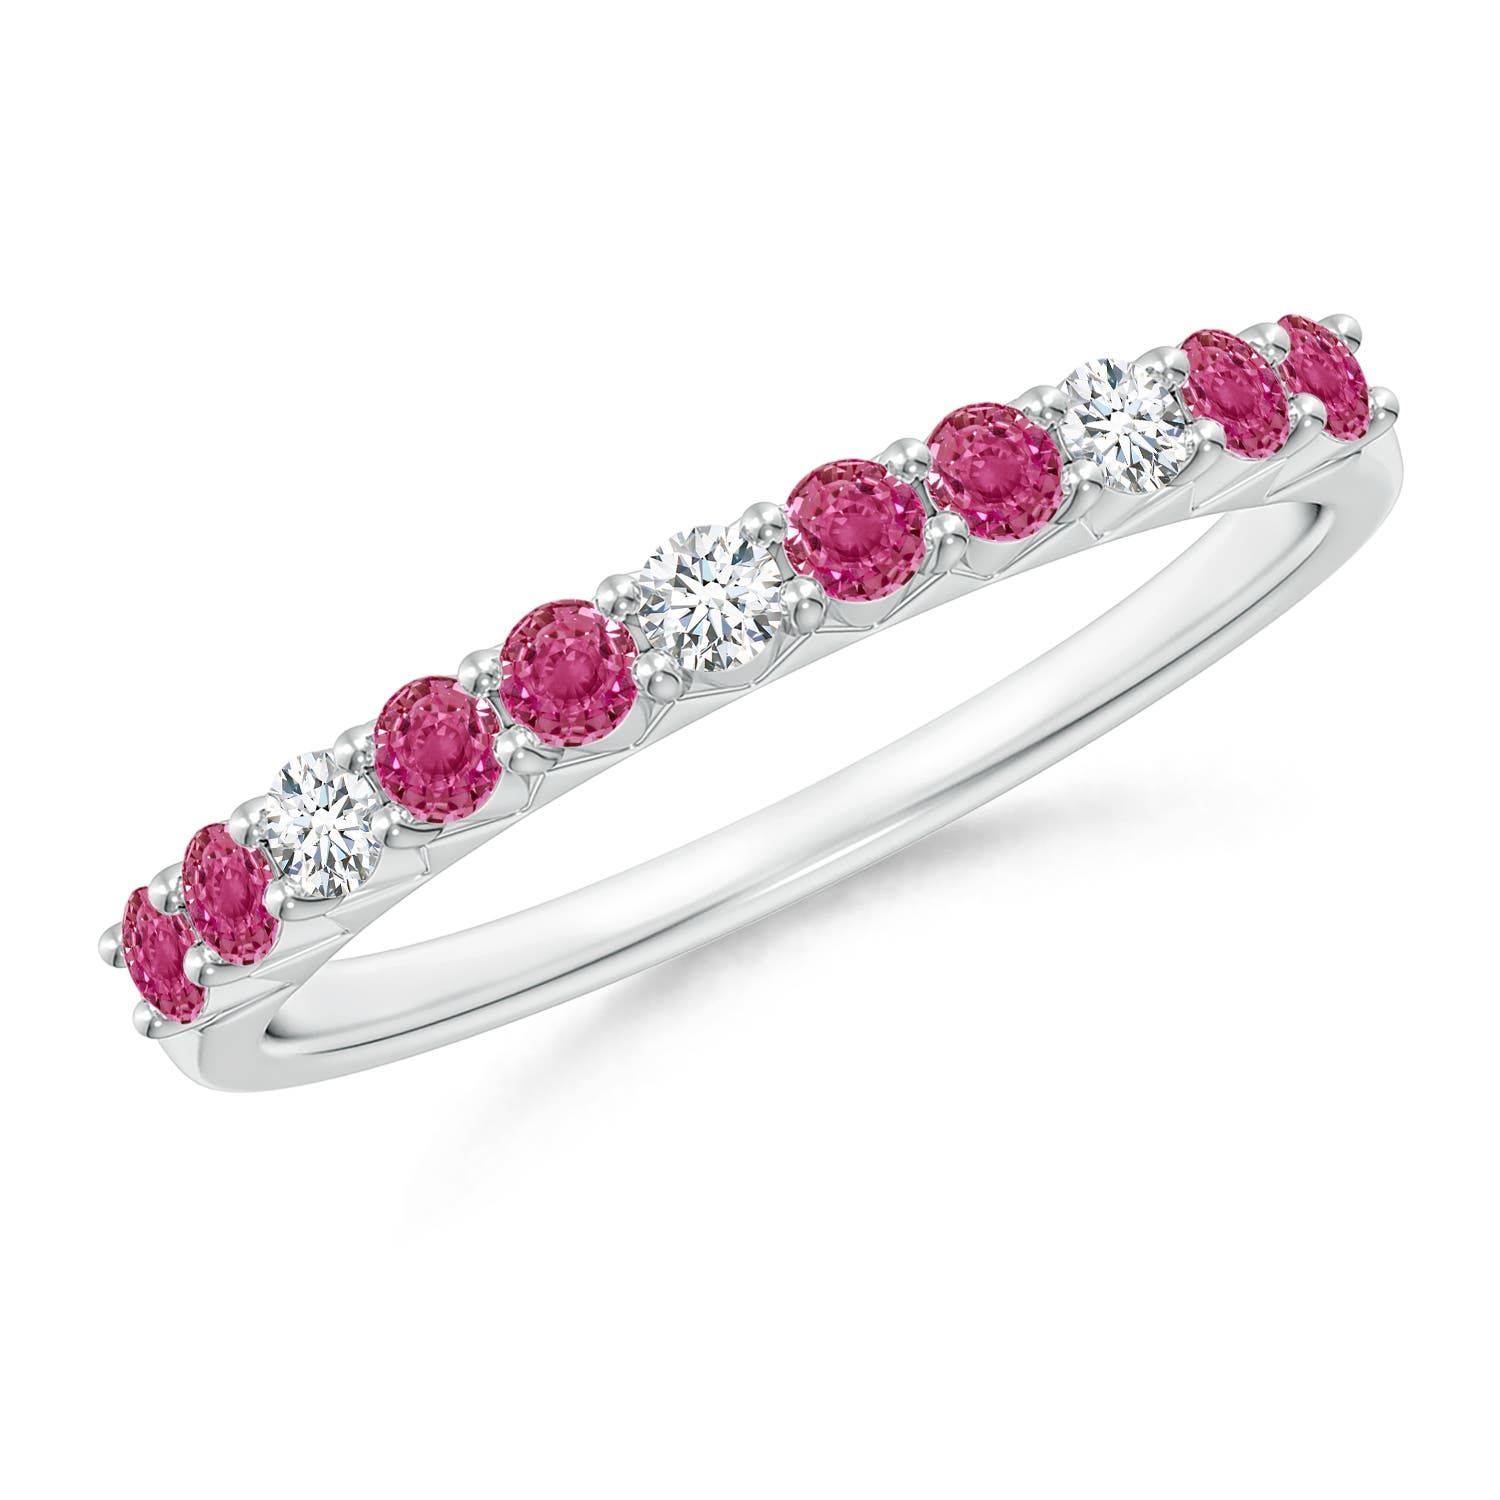 Angara Round Pink Sapphire And Diamond Half Eternity Ring For Women In 14k  Gold | Ebay Inside Pink Sapphire Semi Eternity Rings (View 12 of 25)